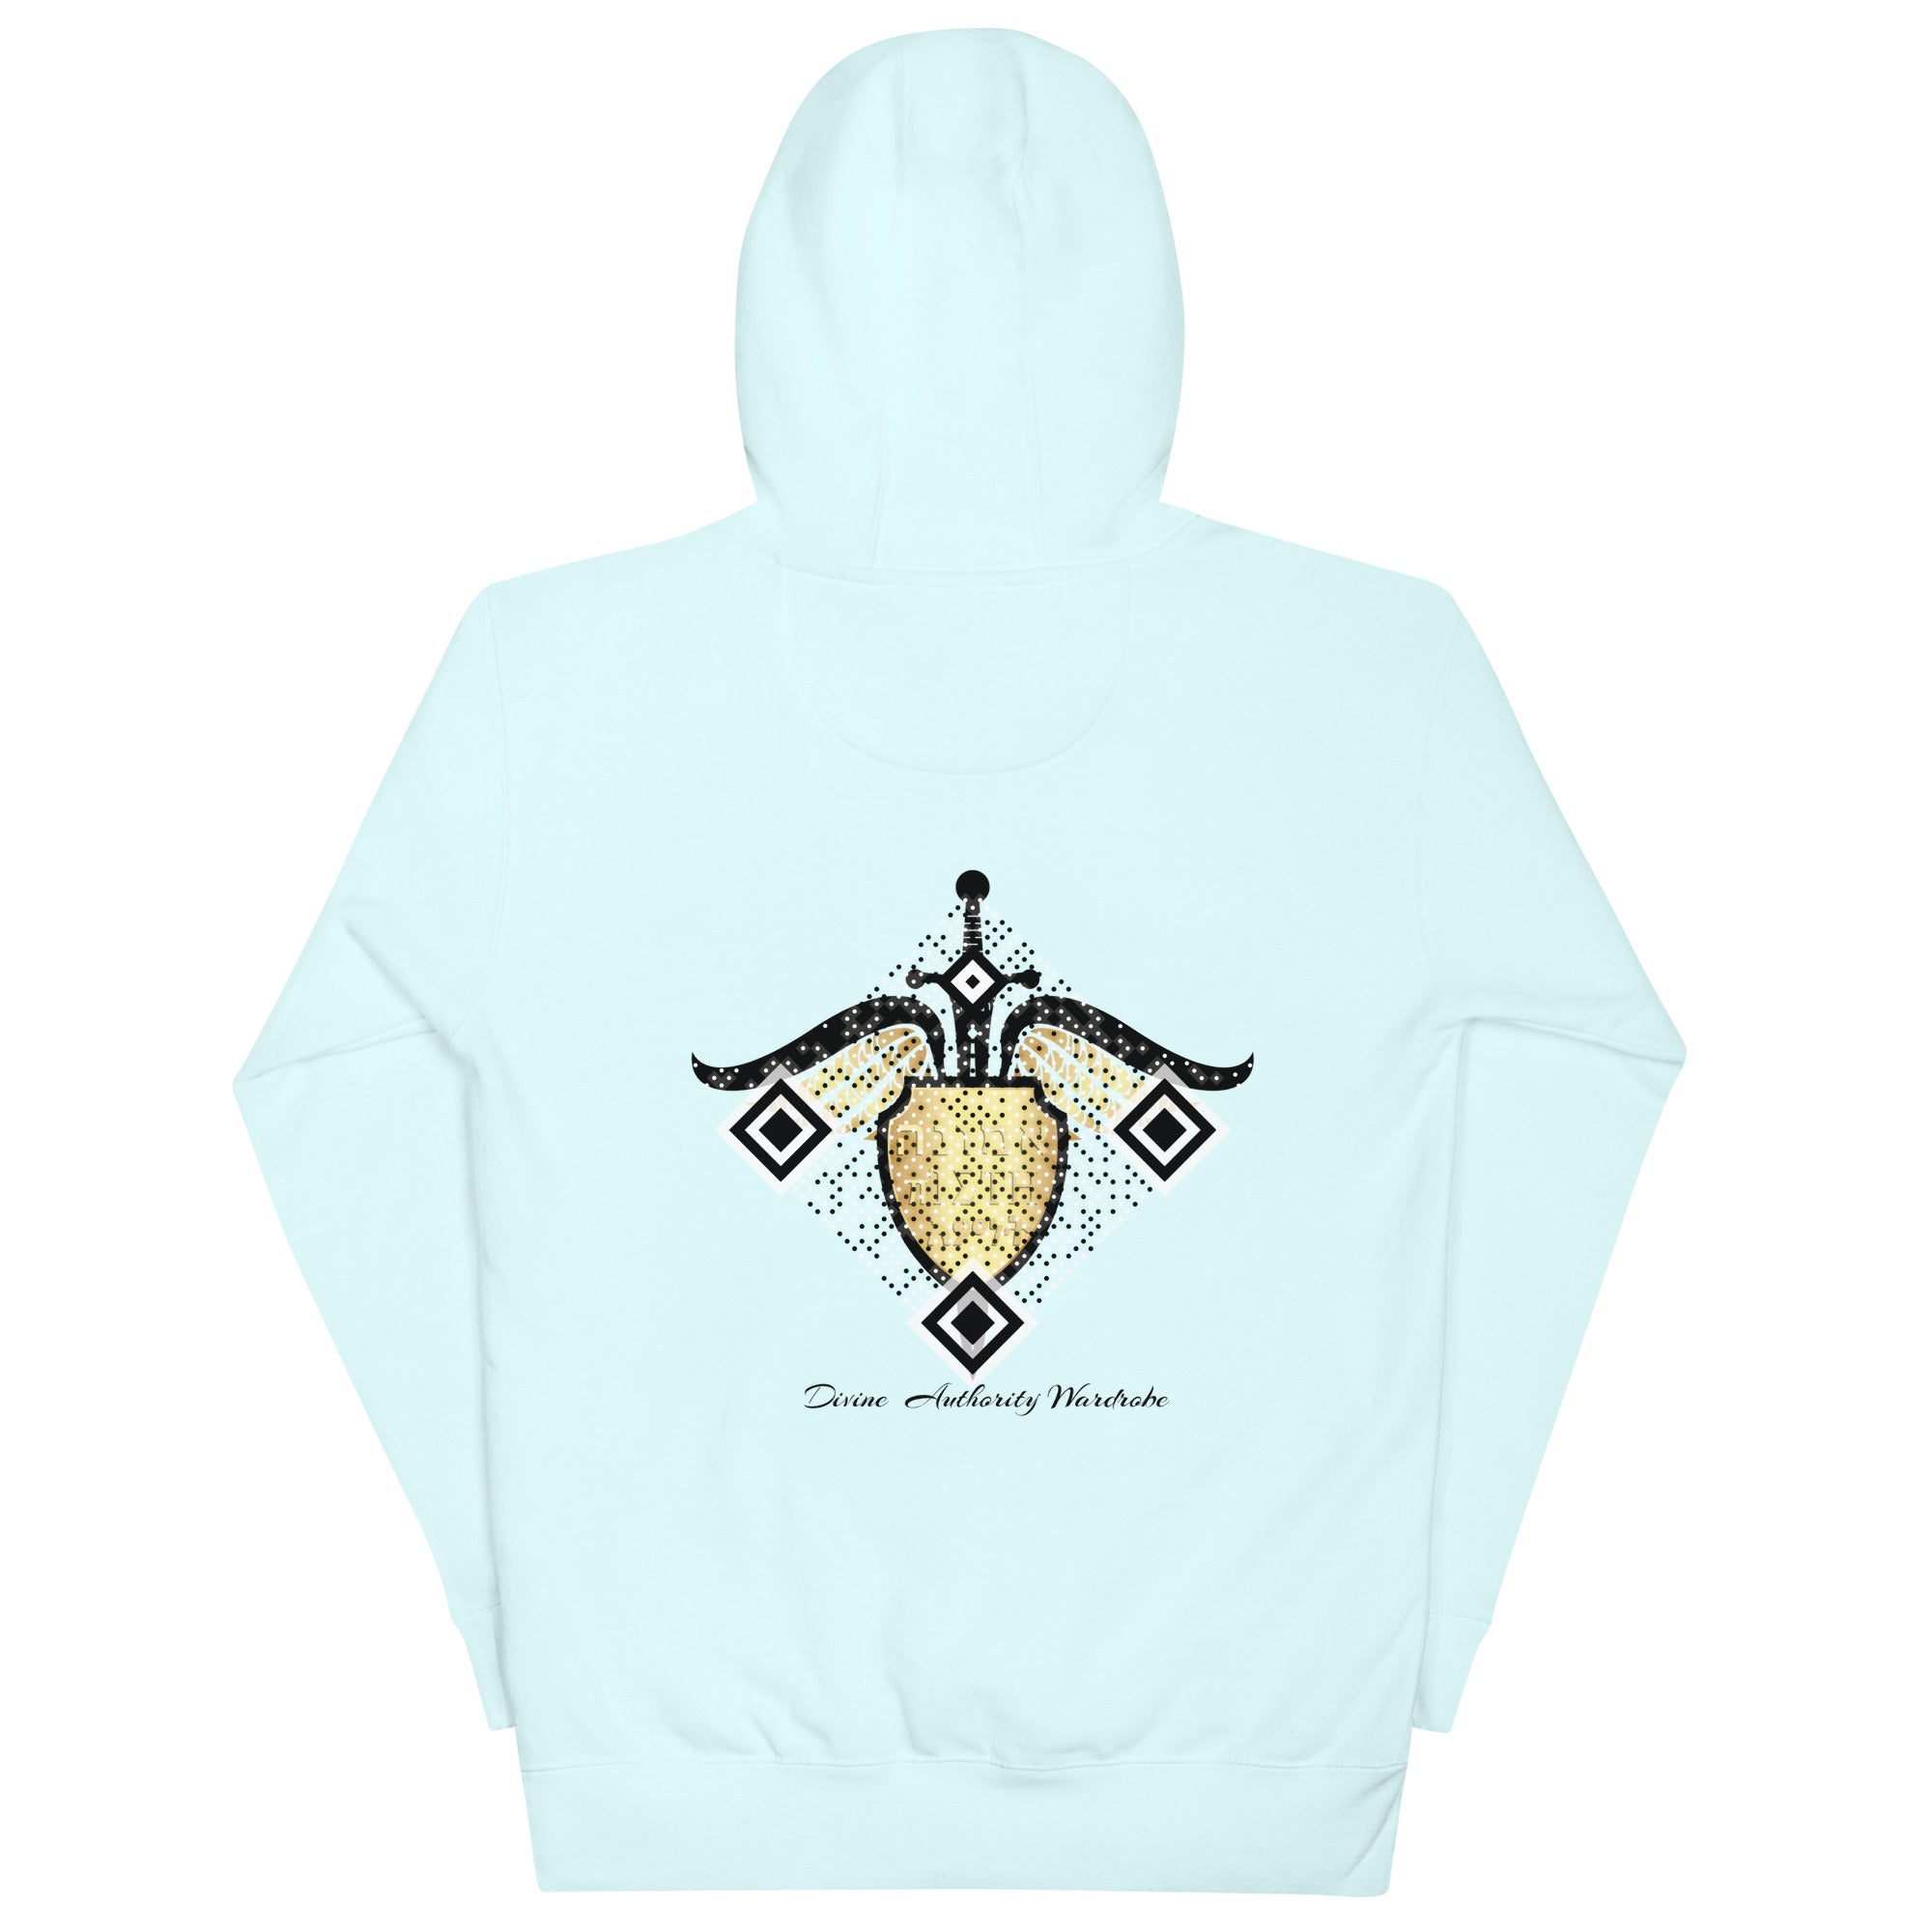 Hand and Face Unisex Hoodie